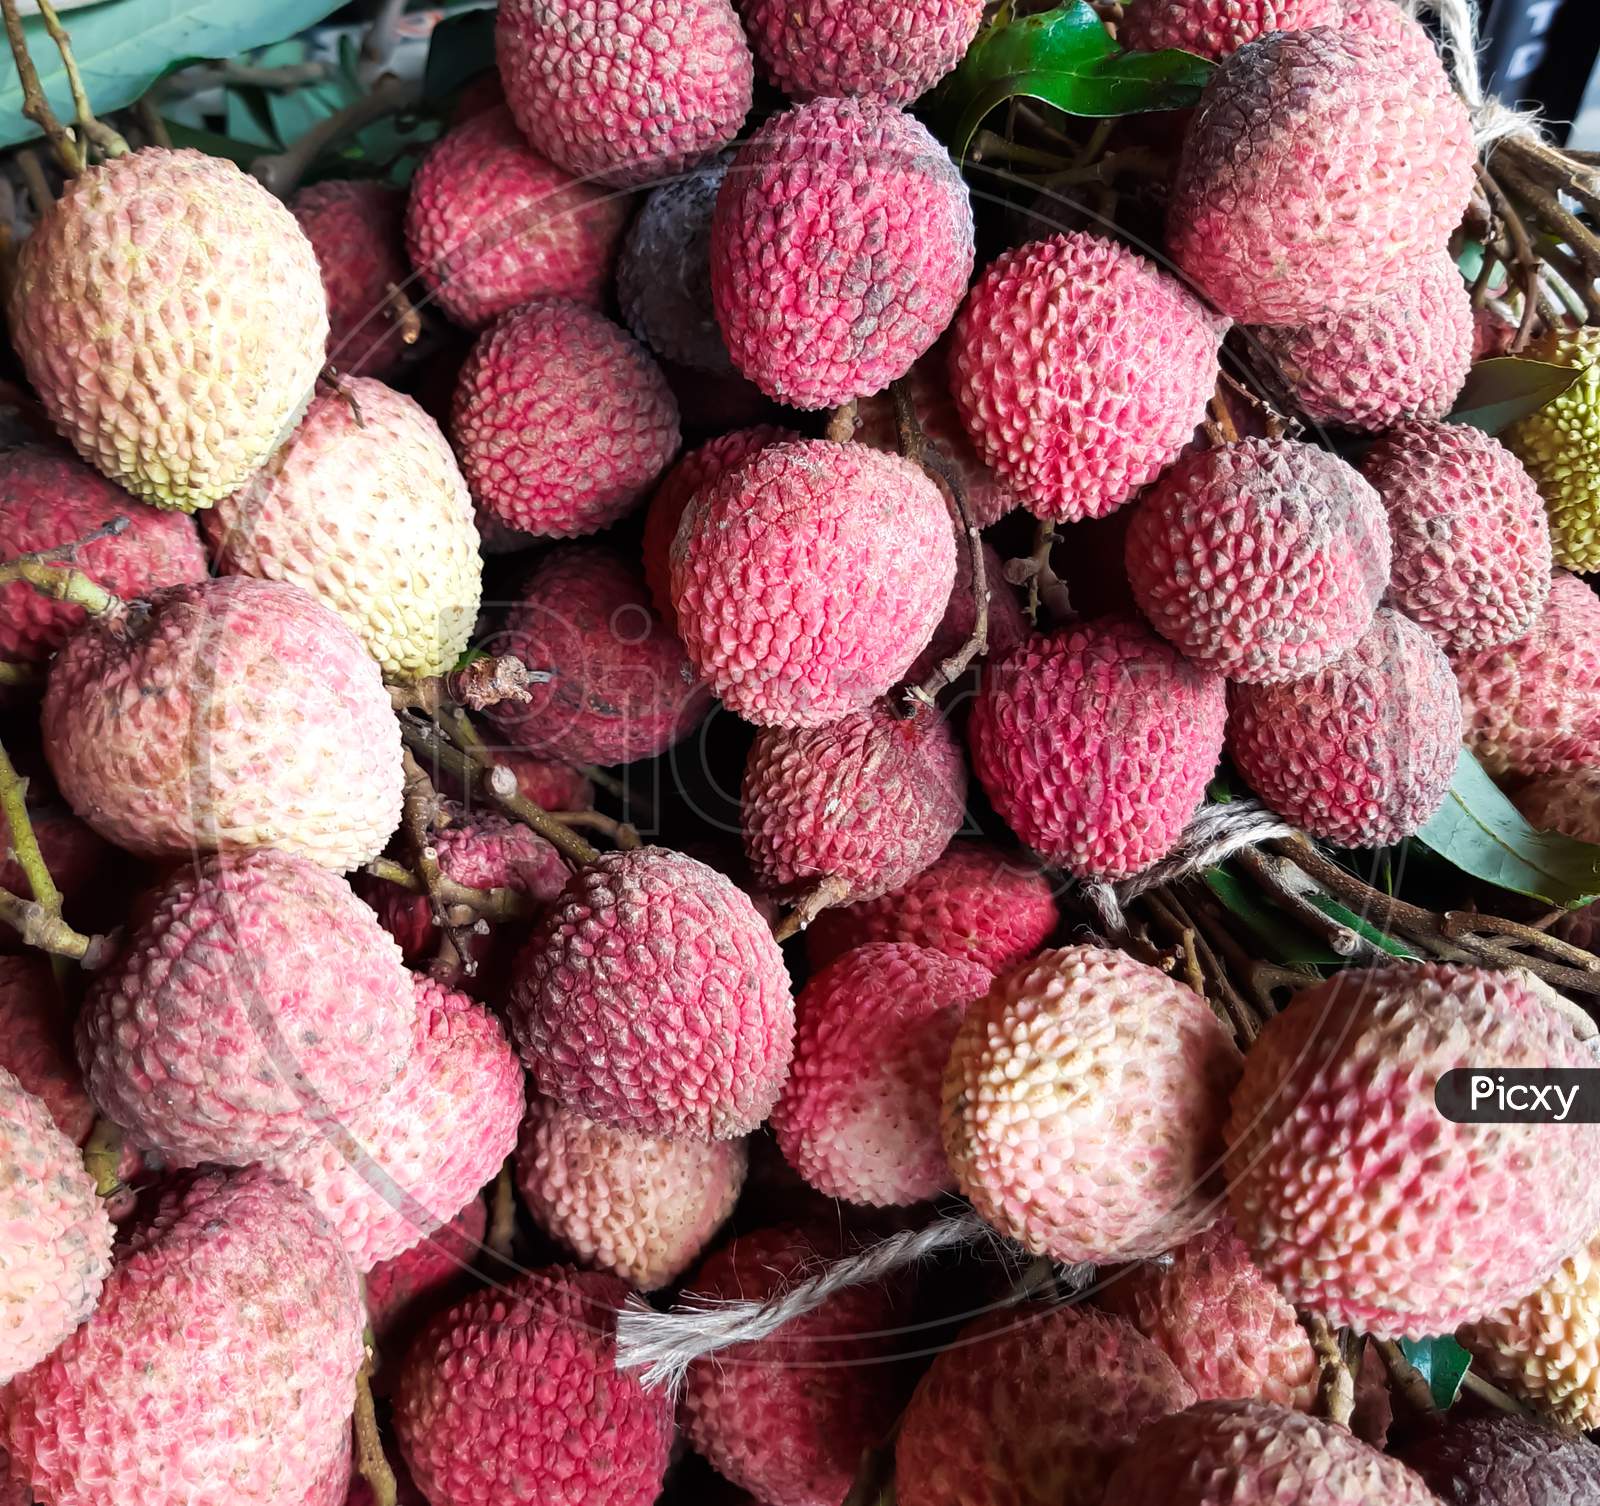 The Ripe Litchis Are Very Sweet And Delicious, They Have Been Put Up For Sale.